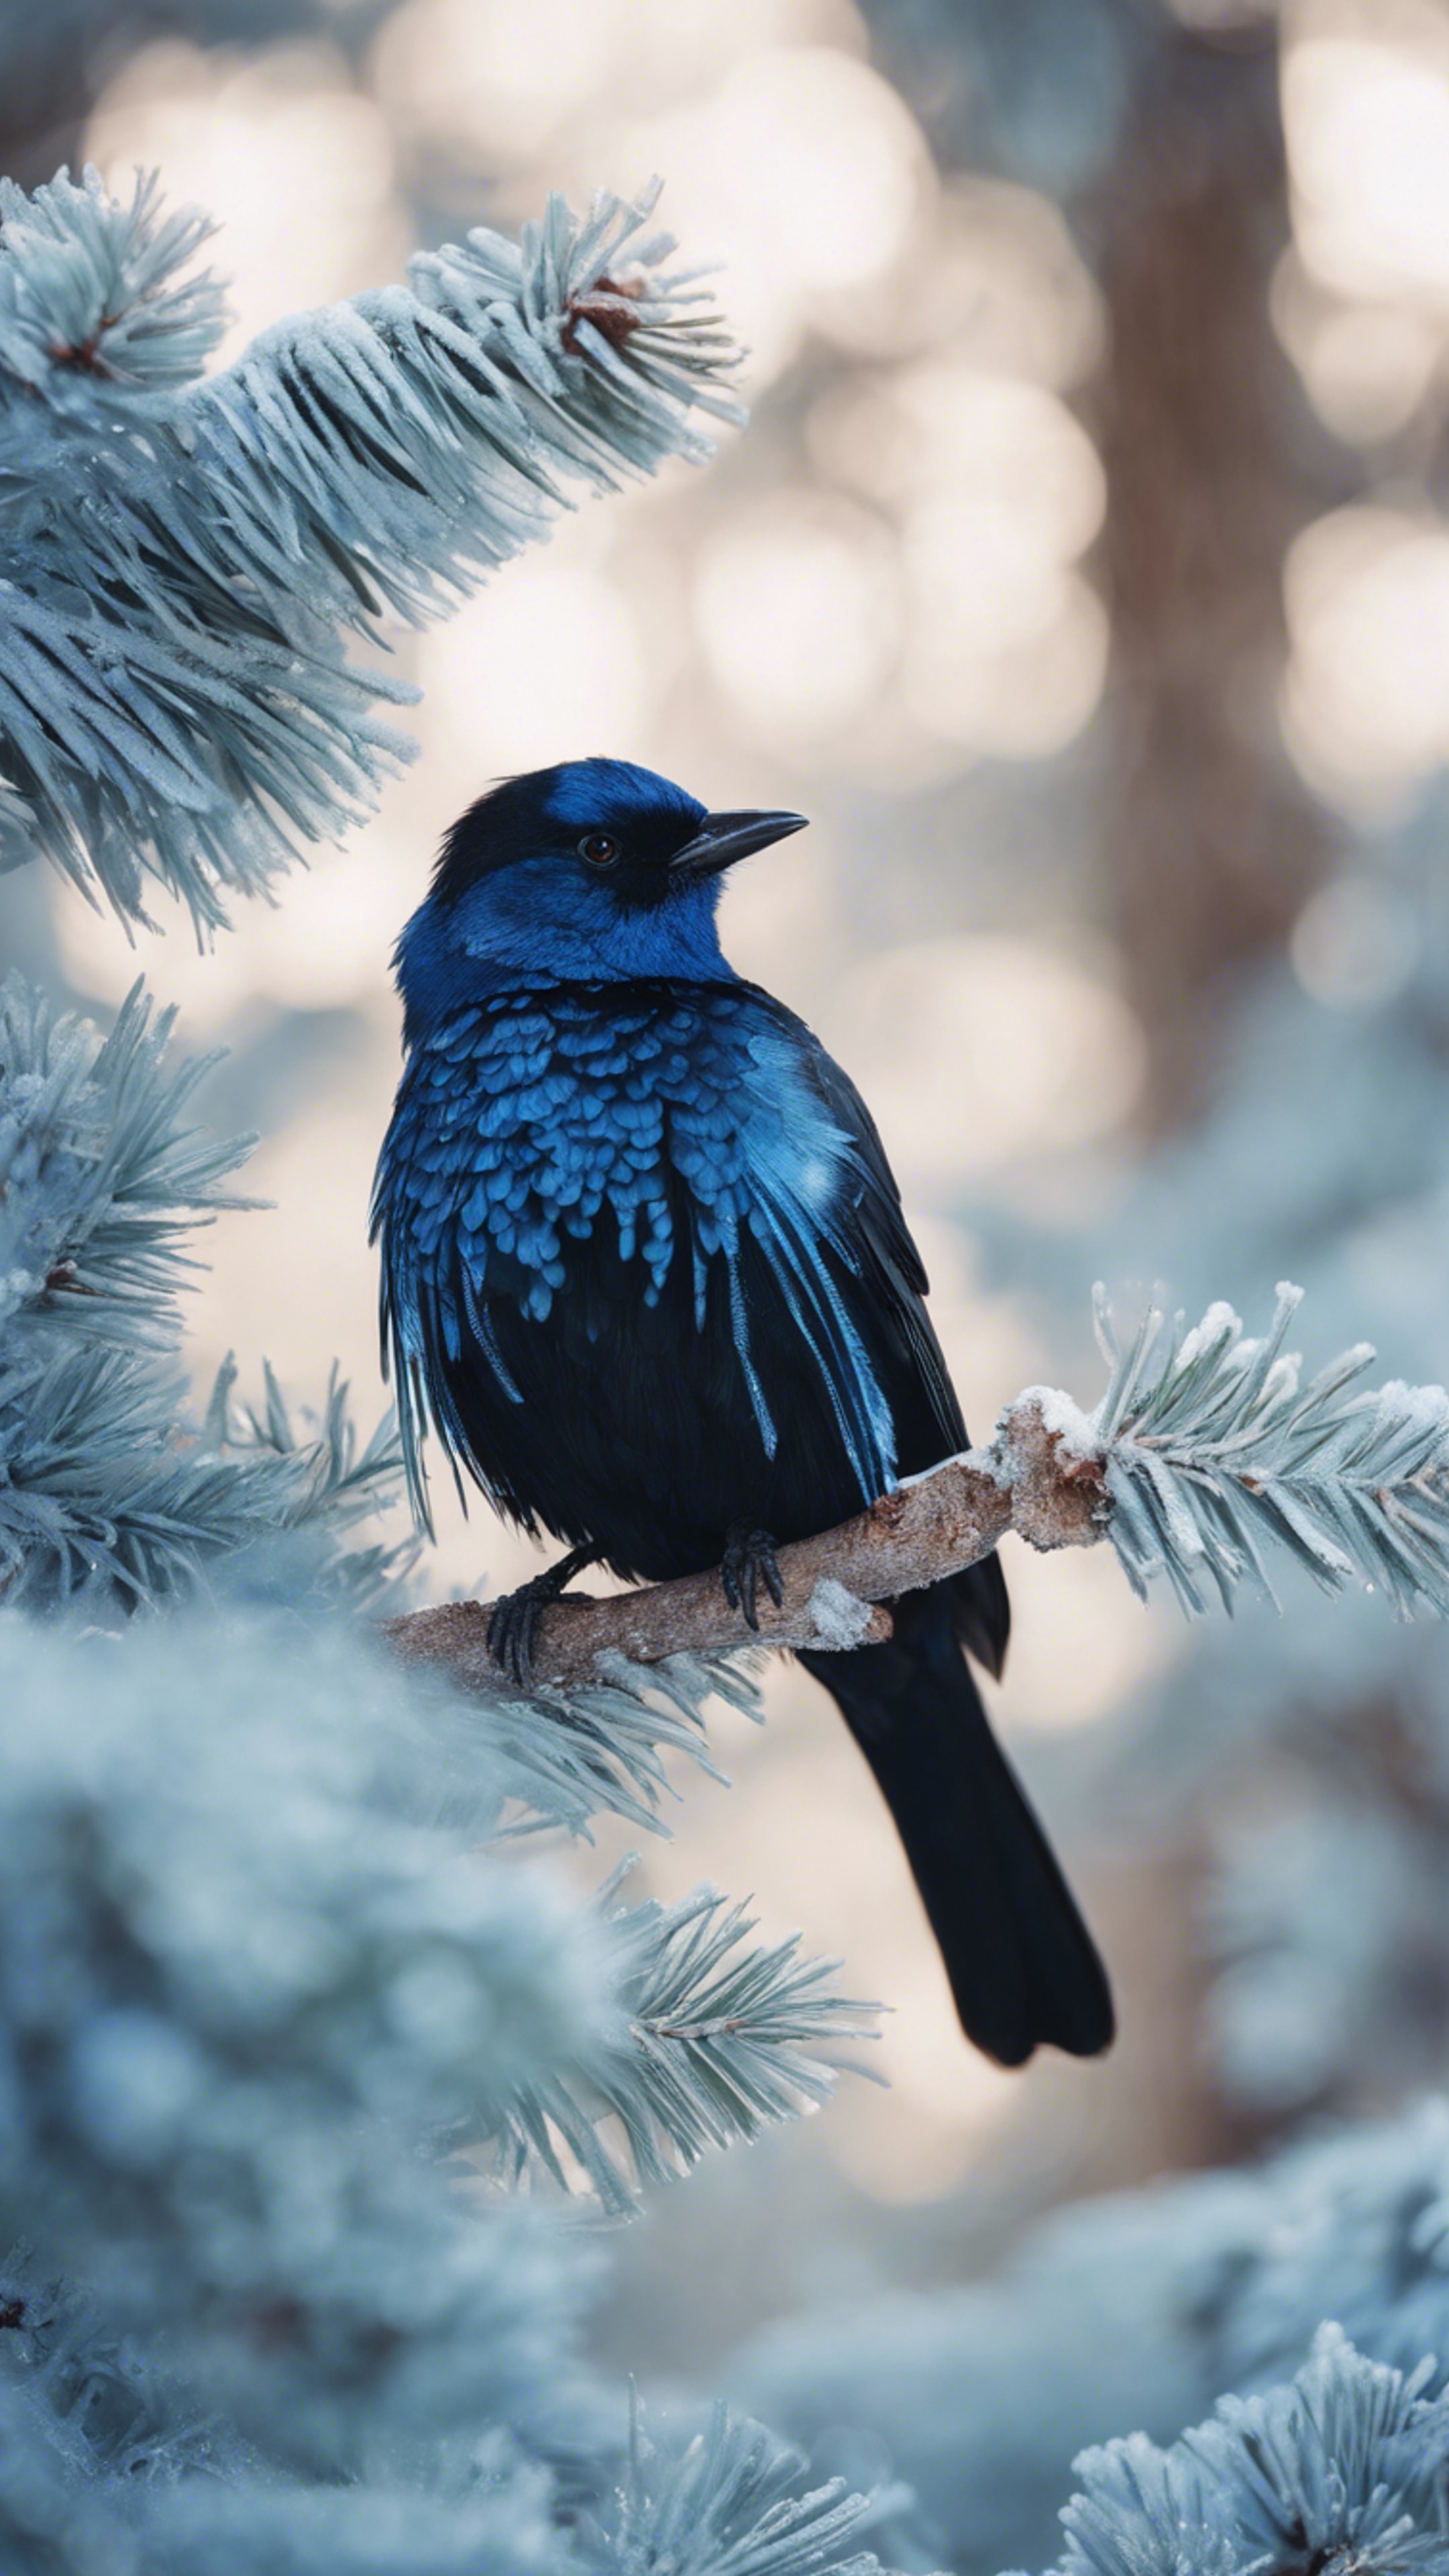 An exotic black bird with shiny blue feathers perched on a frost-covered pine tree. Wallpaper[ea59cd4ef88b4e5e9cf2]